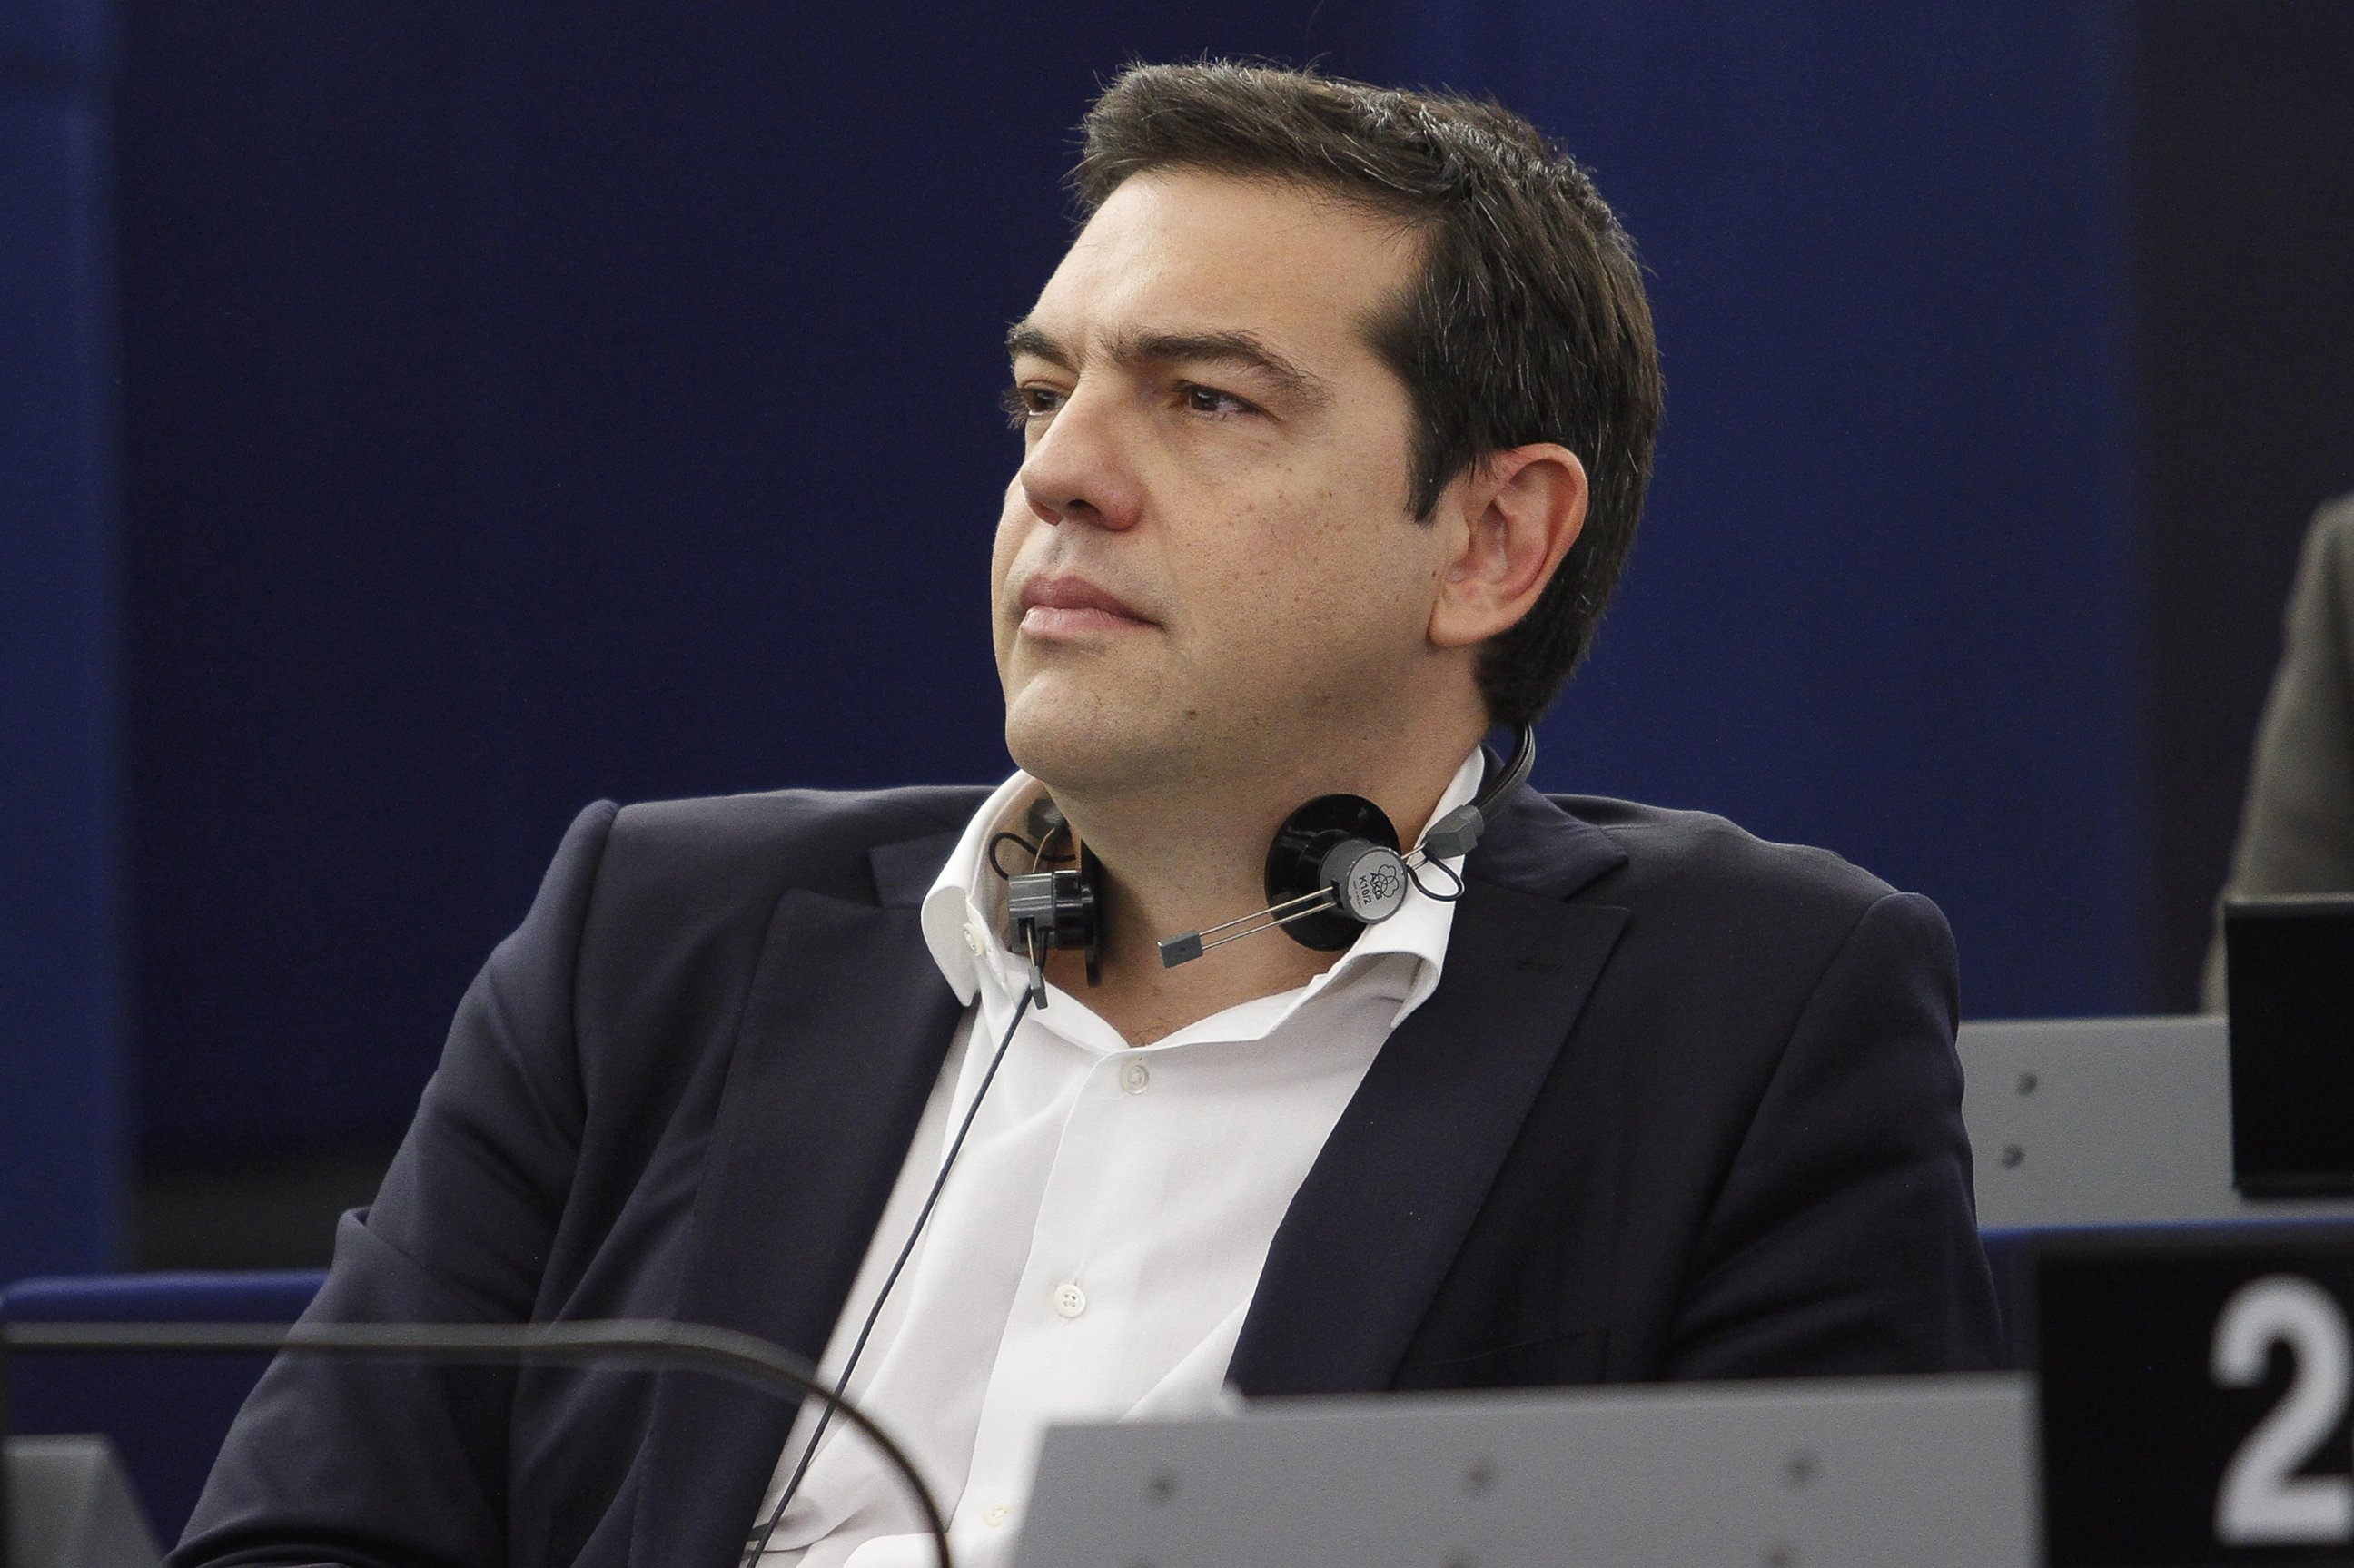 PHOTO: Greek Prime Minister Alexis Tsipras listens in the plenary hall at the European Parliament on July 8, 2015 in Strasbourg, France.  